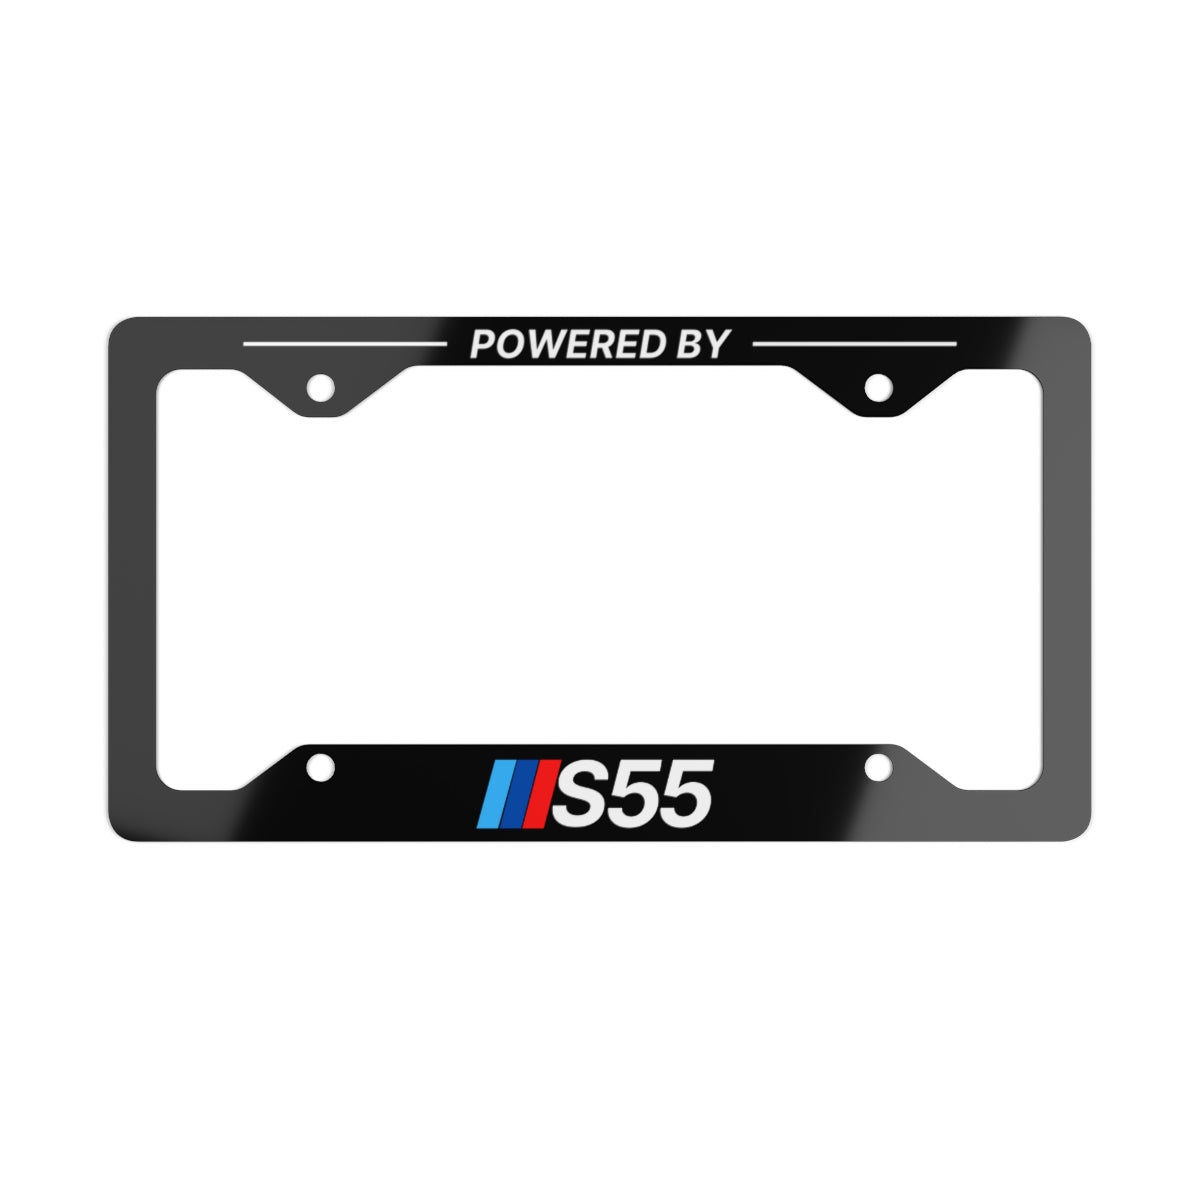 Powered By S55 Metal License Plate Frame